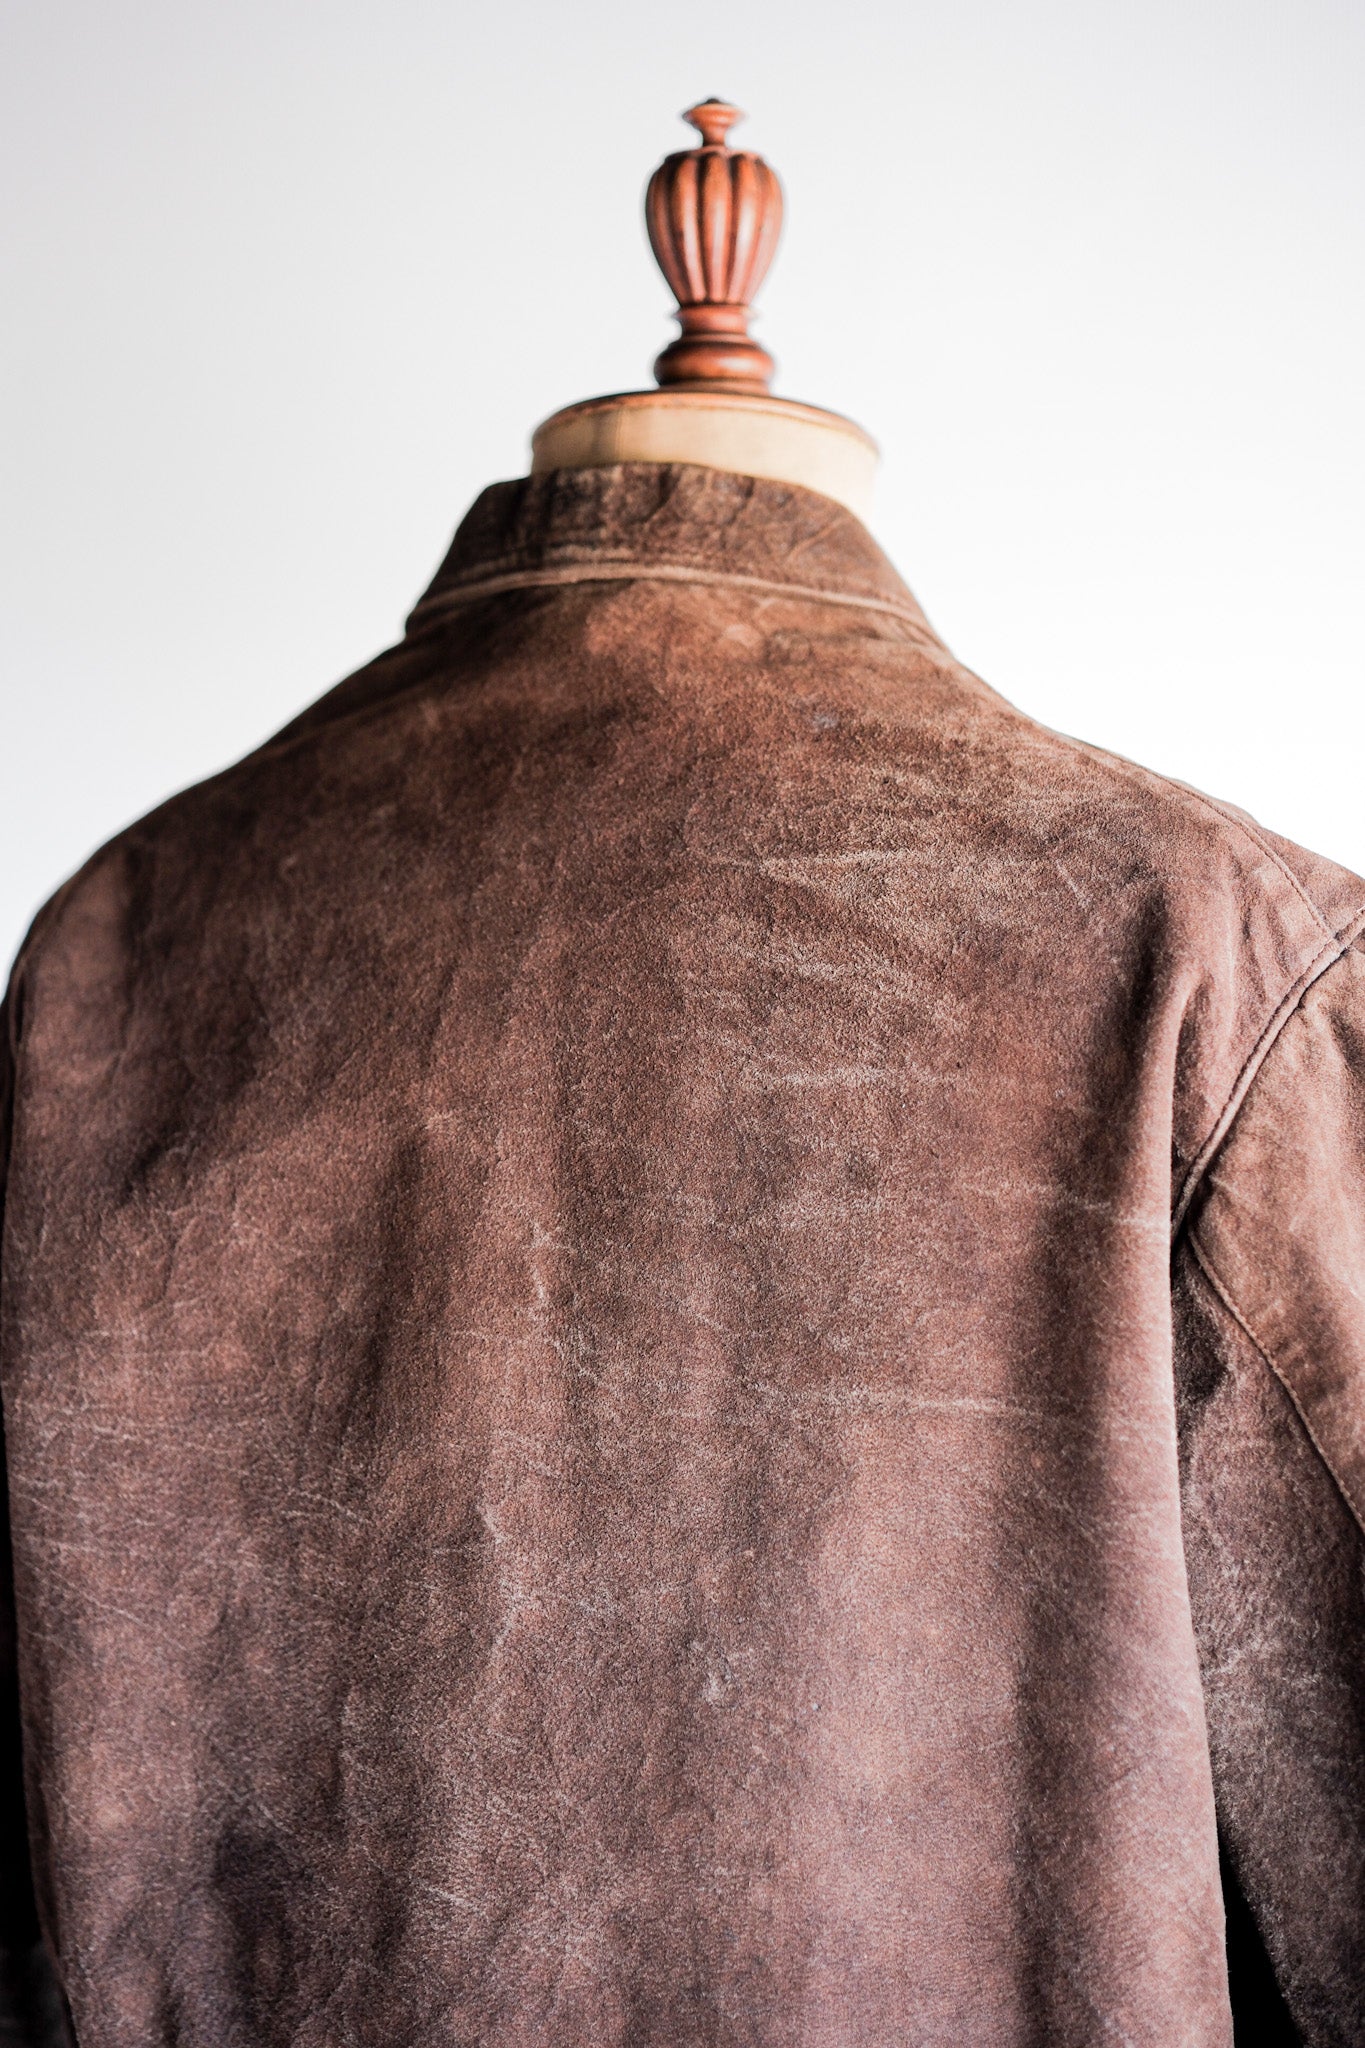 【~30’s】French Vintage Suede Leather Cyclist Jacket